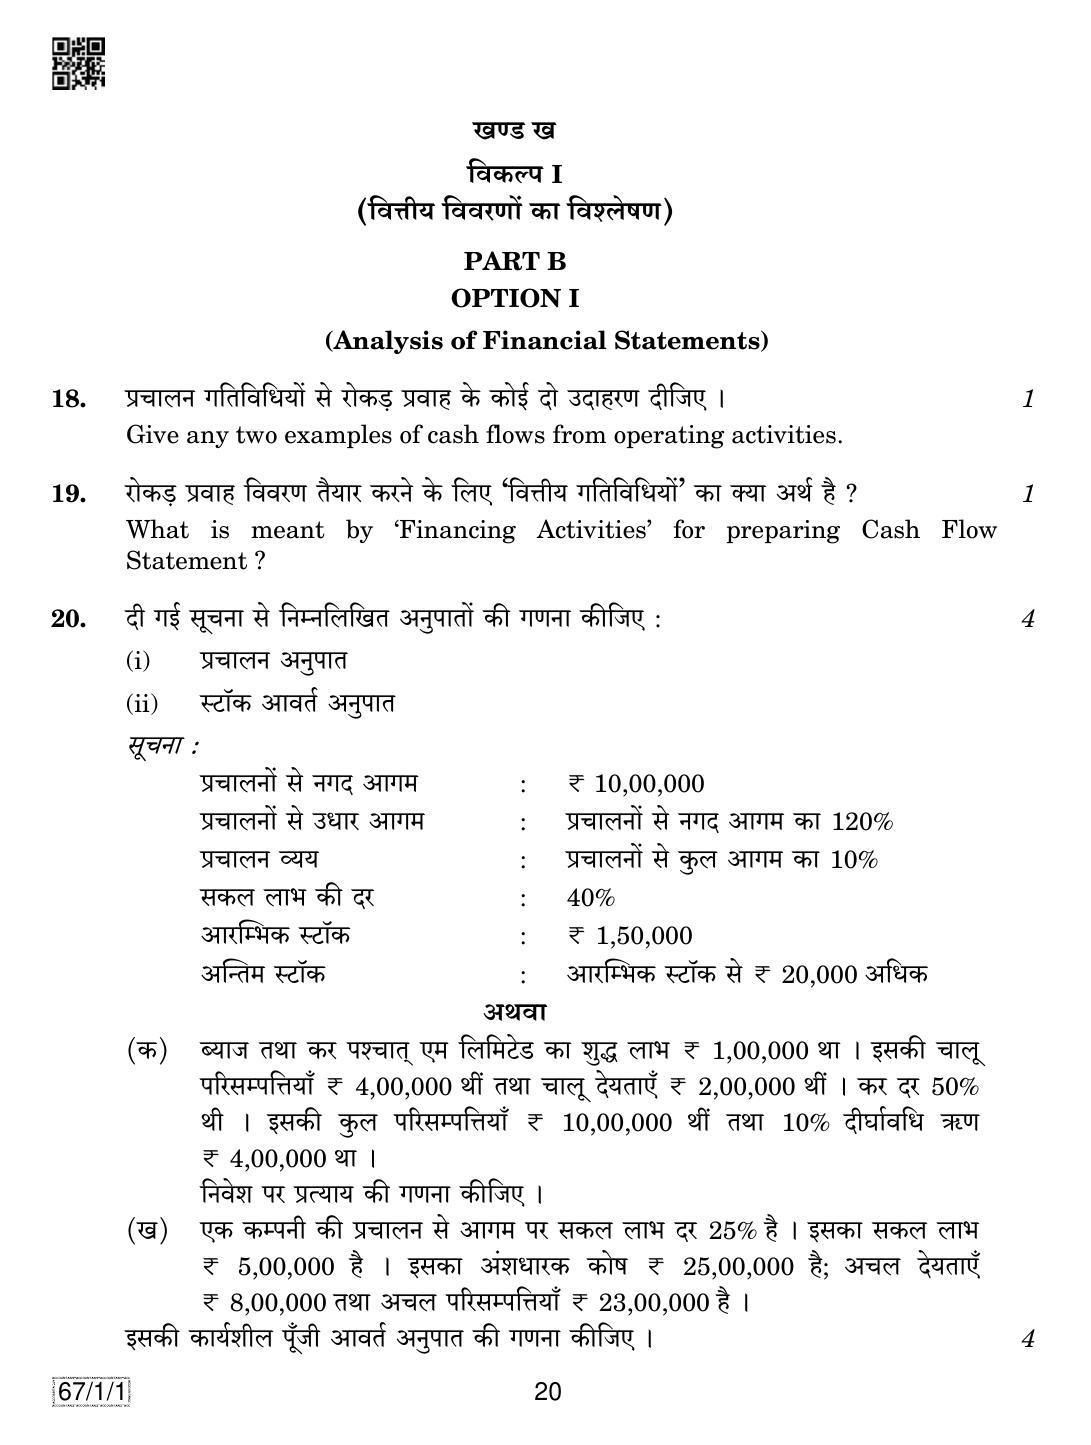 CBSE Class 12 67-1-1 ACCOUNTANCY 2019 Compartment Question Paper - Page 20